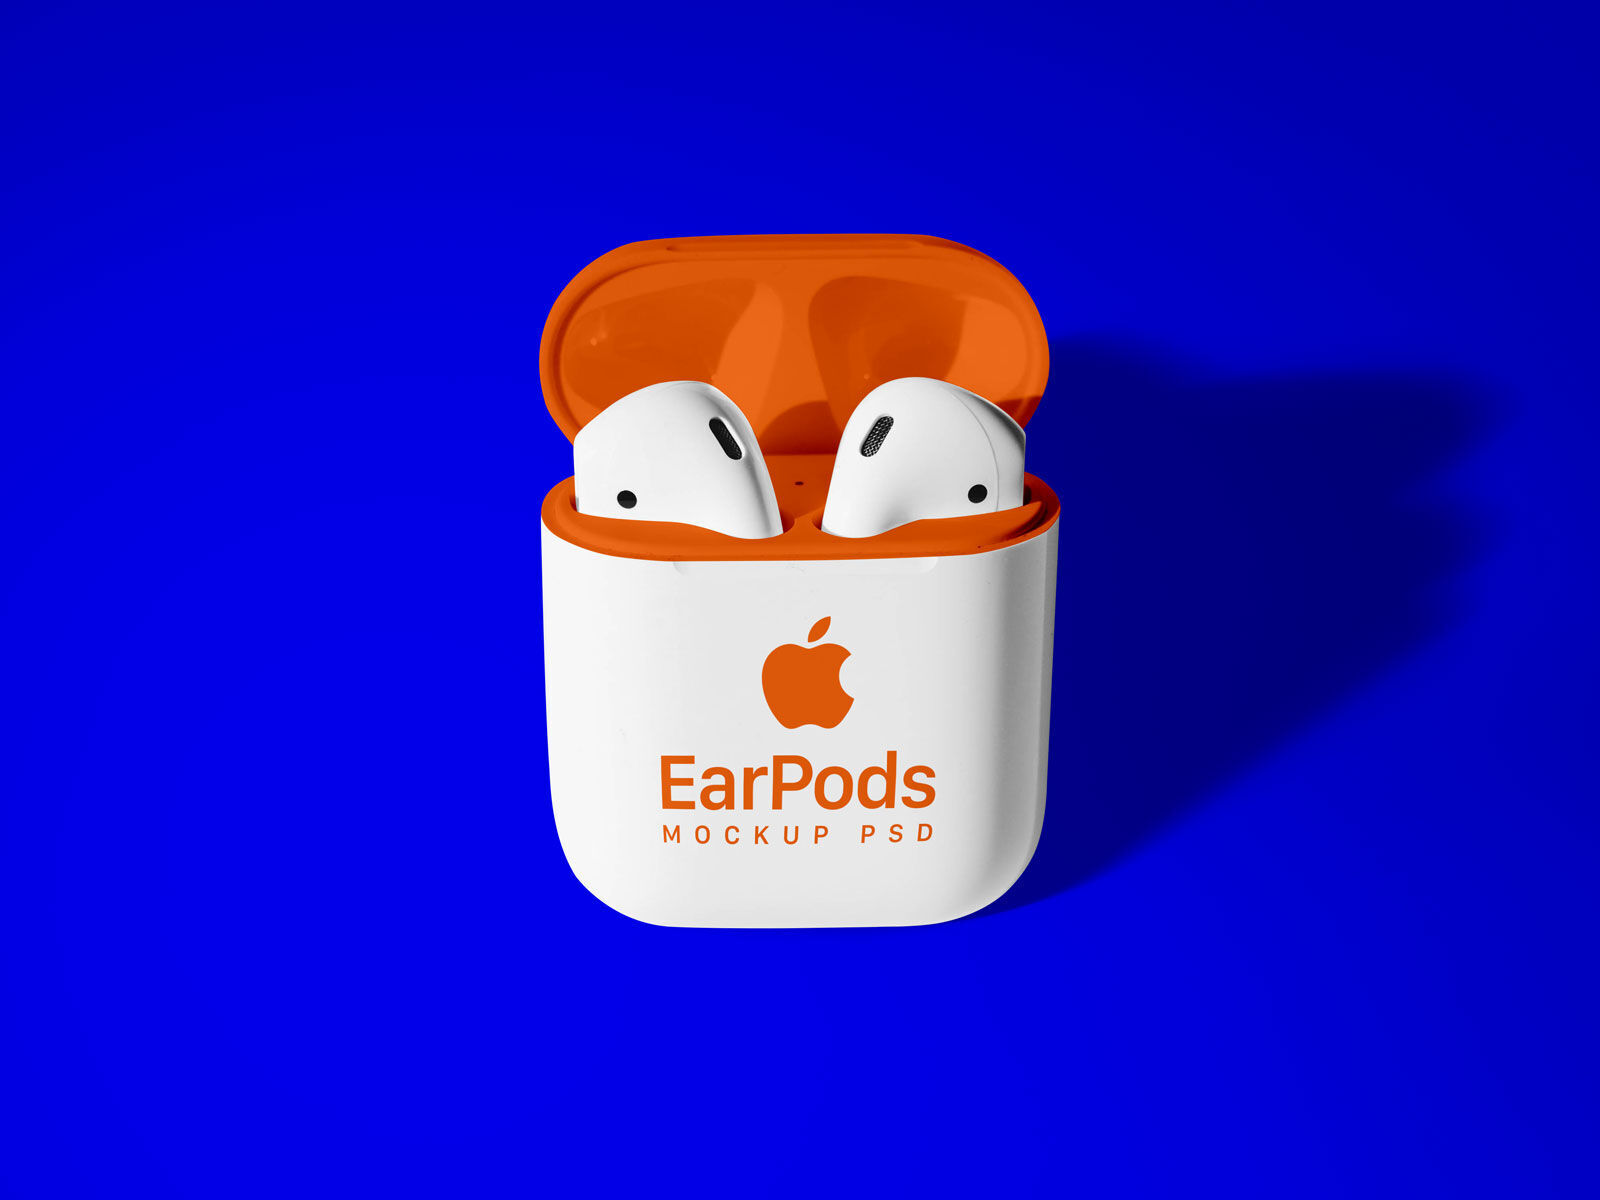 Mockup Featuring a Front View of an Apple AirPods Case and its earpieces FREE PSD